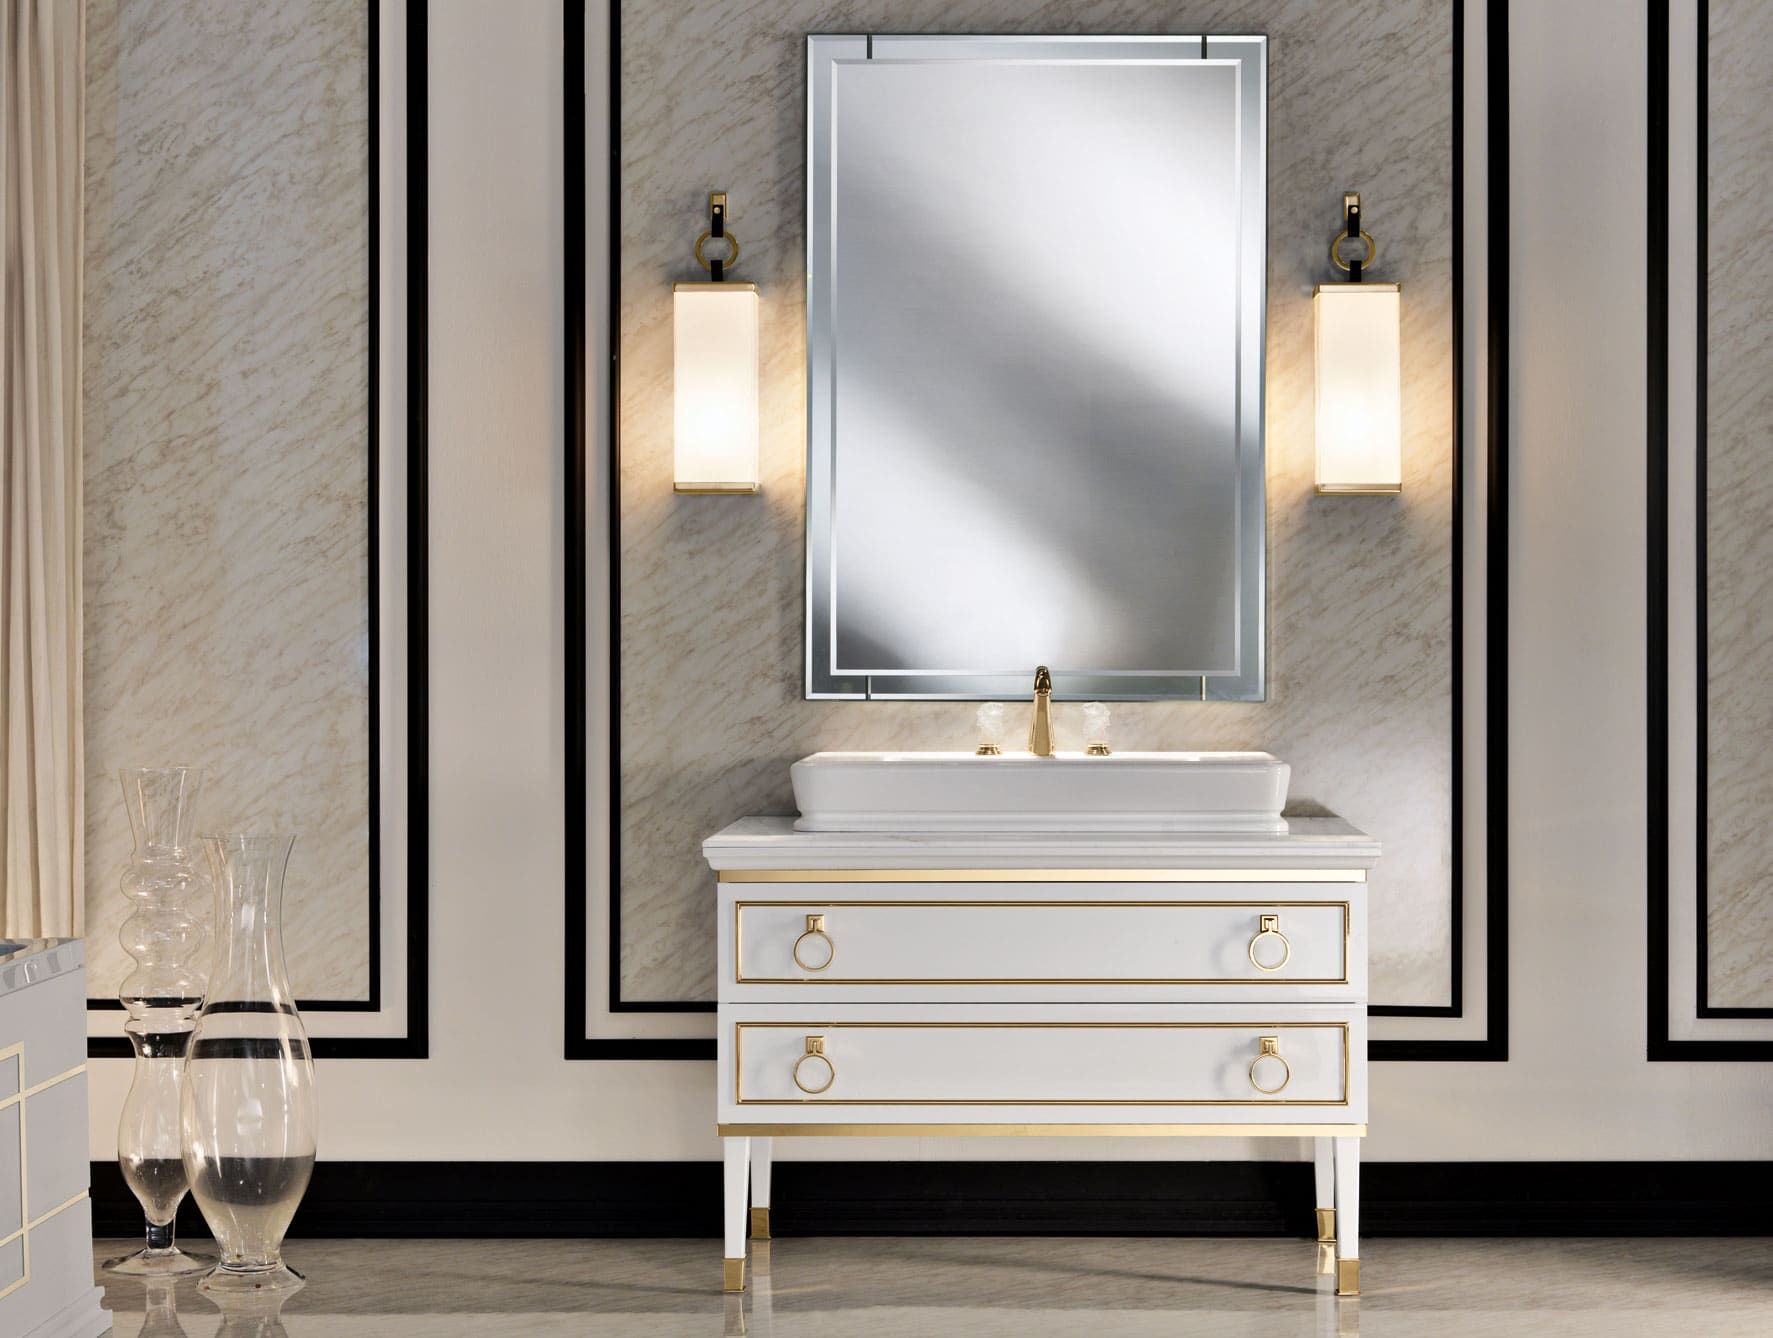 Lutetia classic luxury bathroom vanity with white lacquered wood